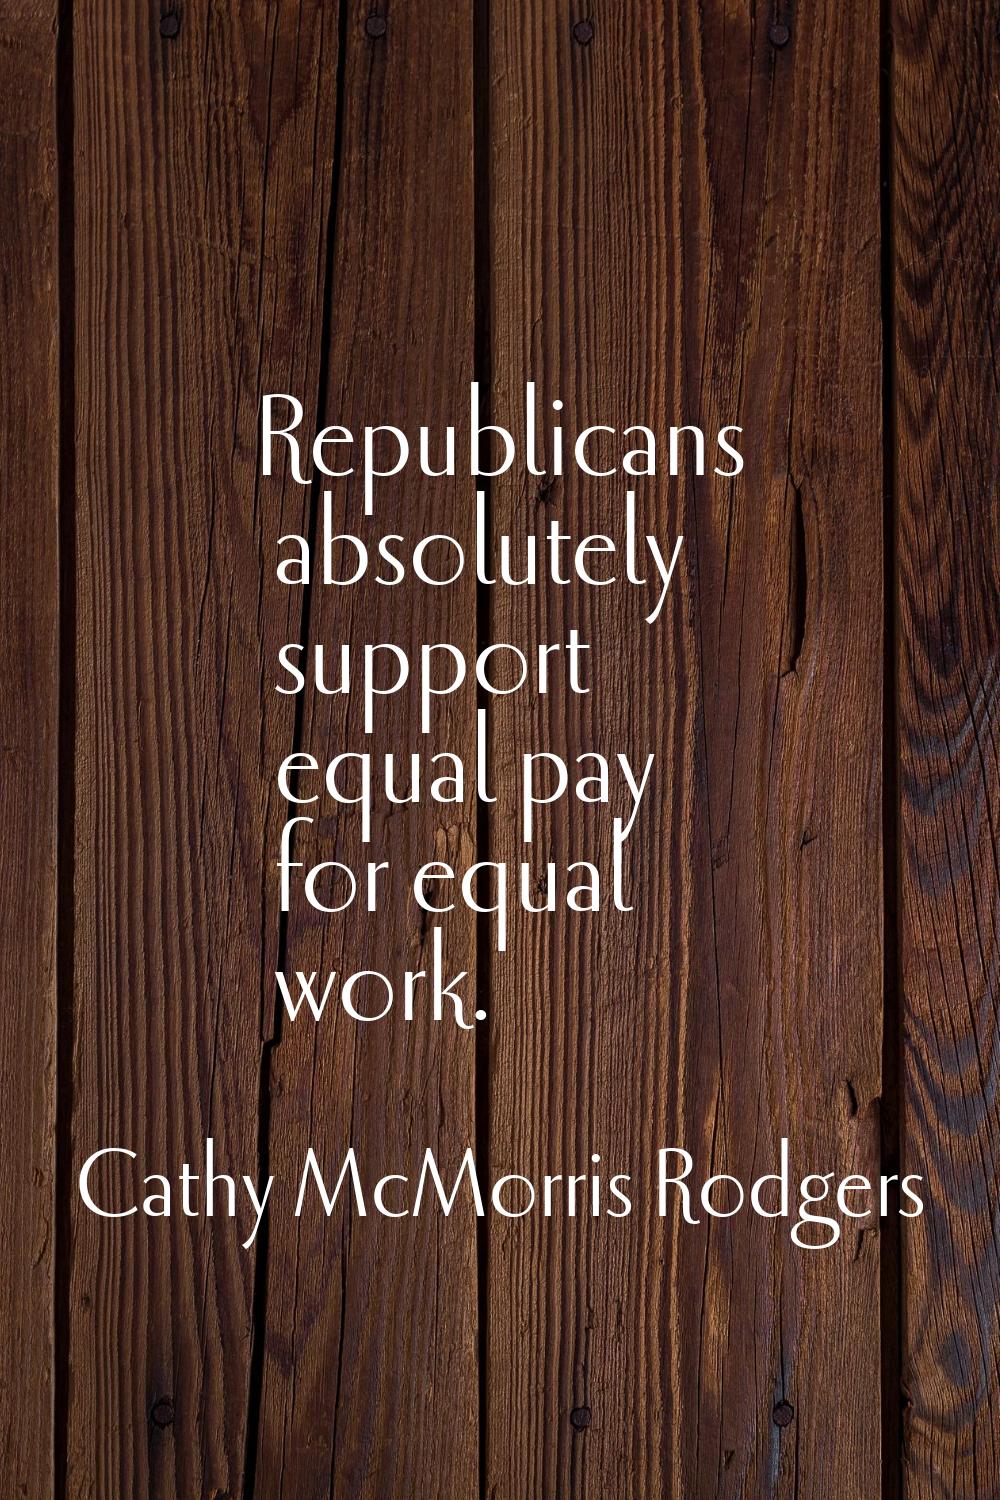 Republicans absolutely support equal pay for equal work.